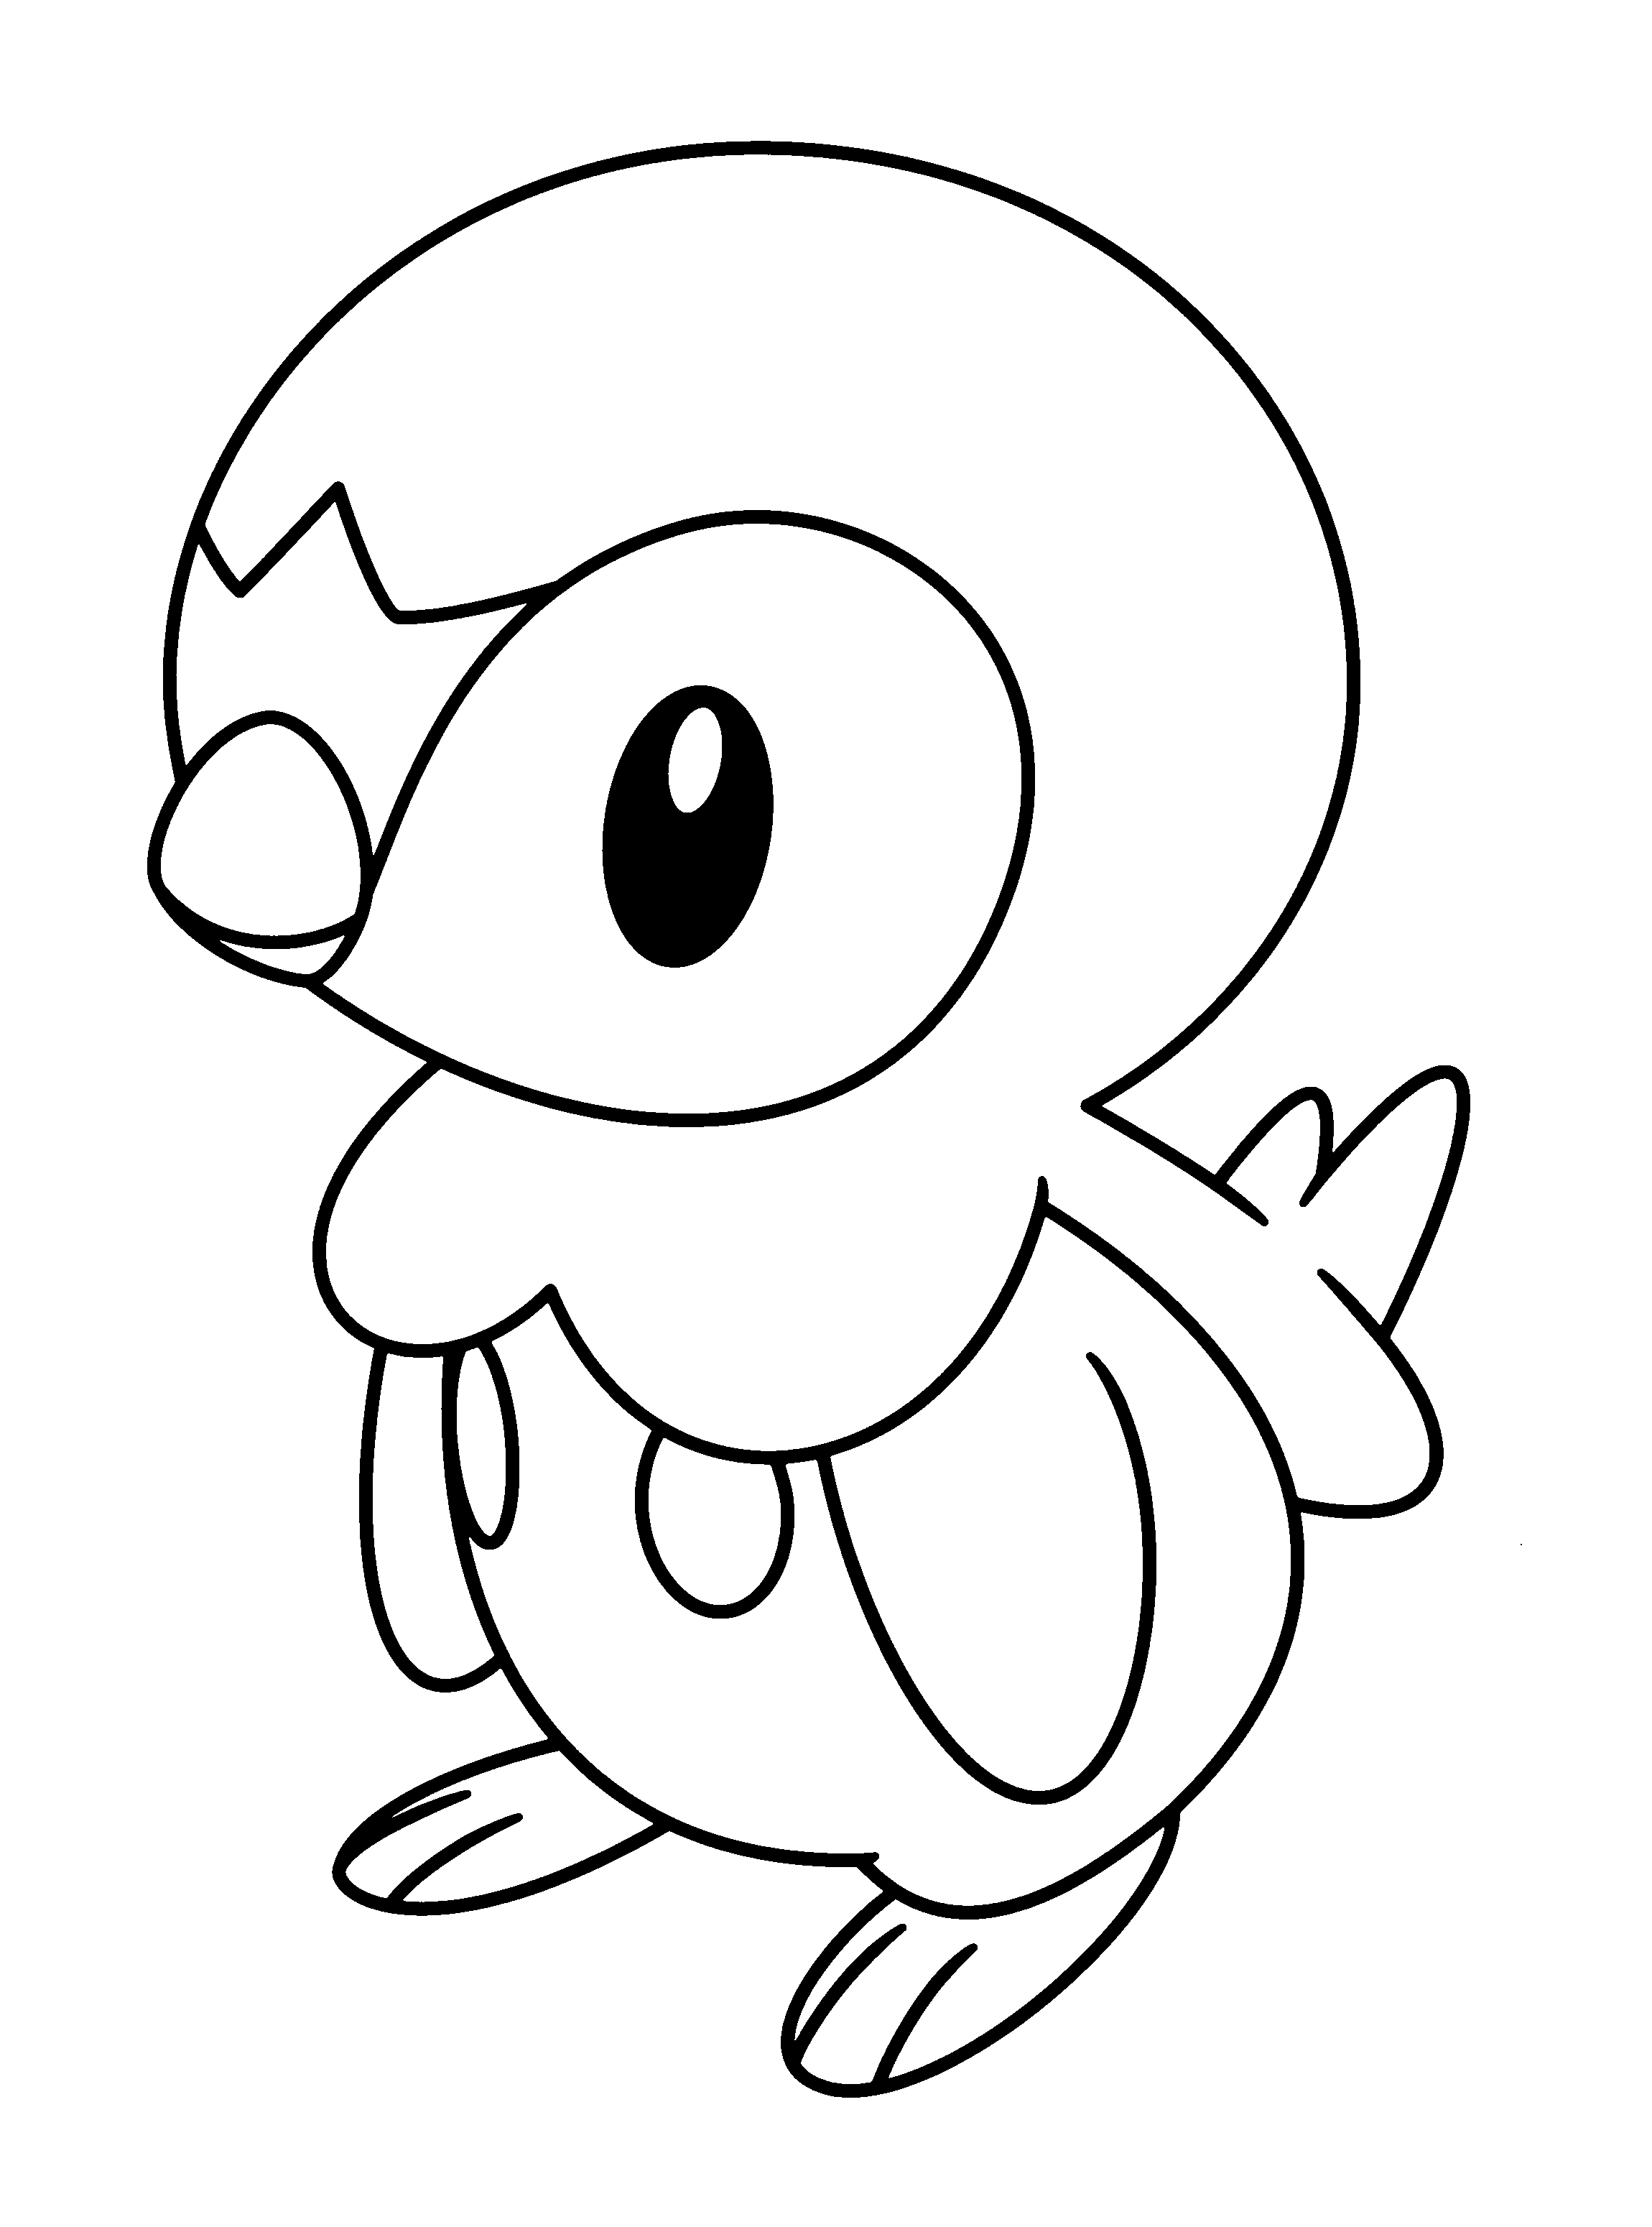 Pokemon diamond pearl coloring pages